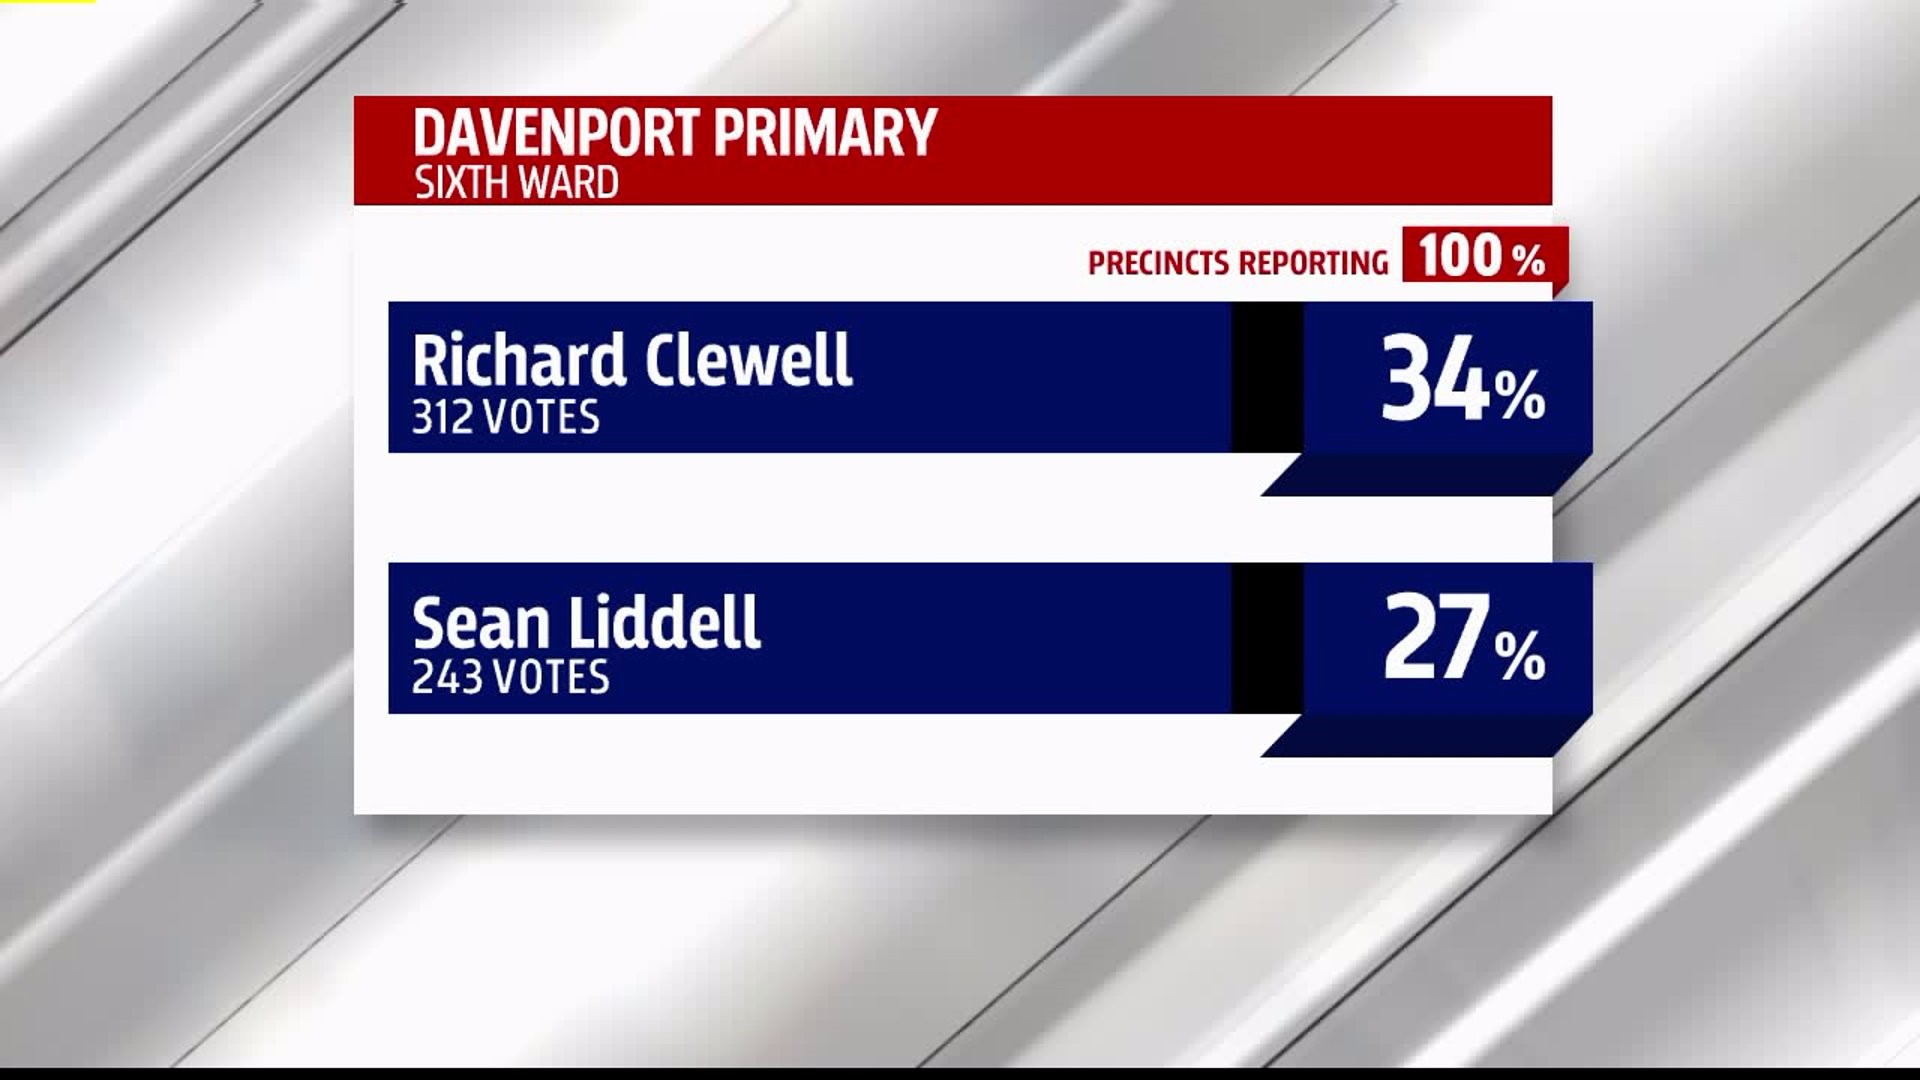 Primary results for Davenport Sixth Ward election